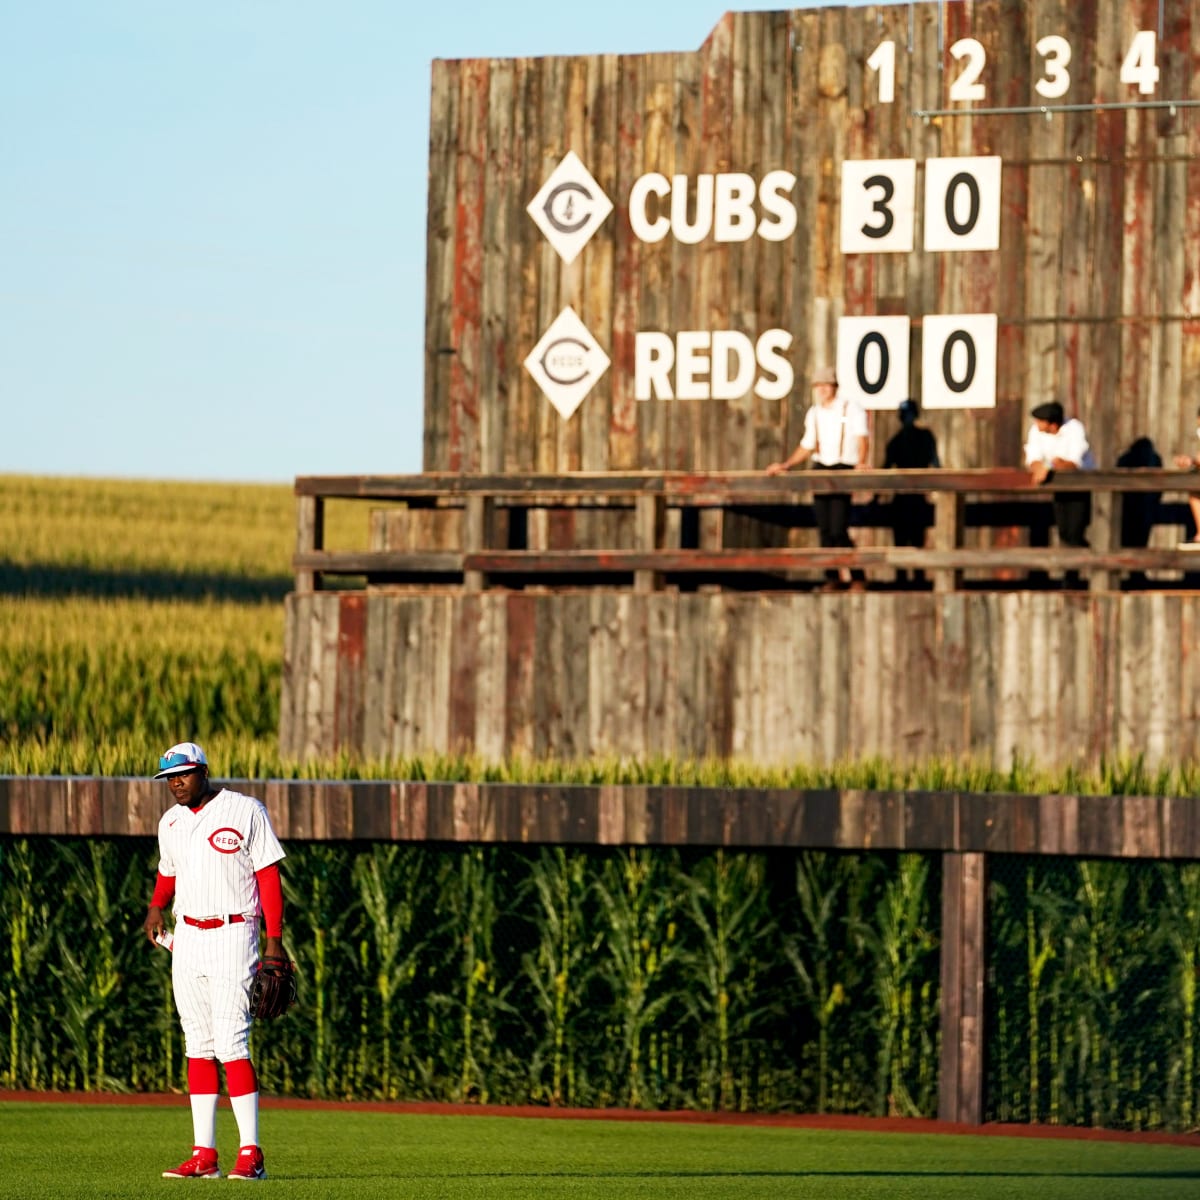 Field of Dreams game is MLBs guide to create more special events